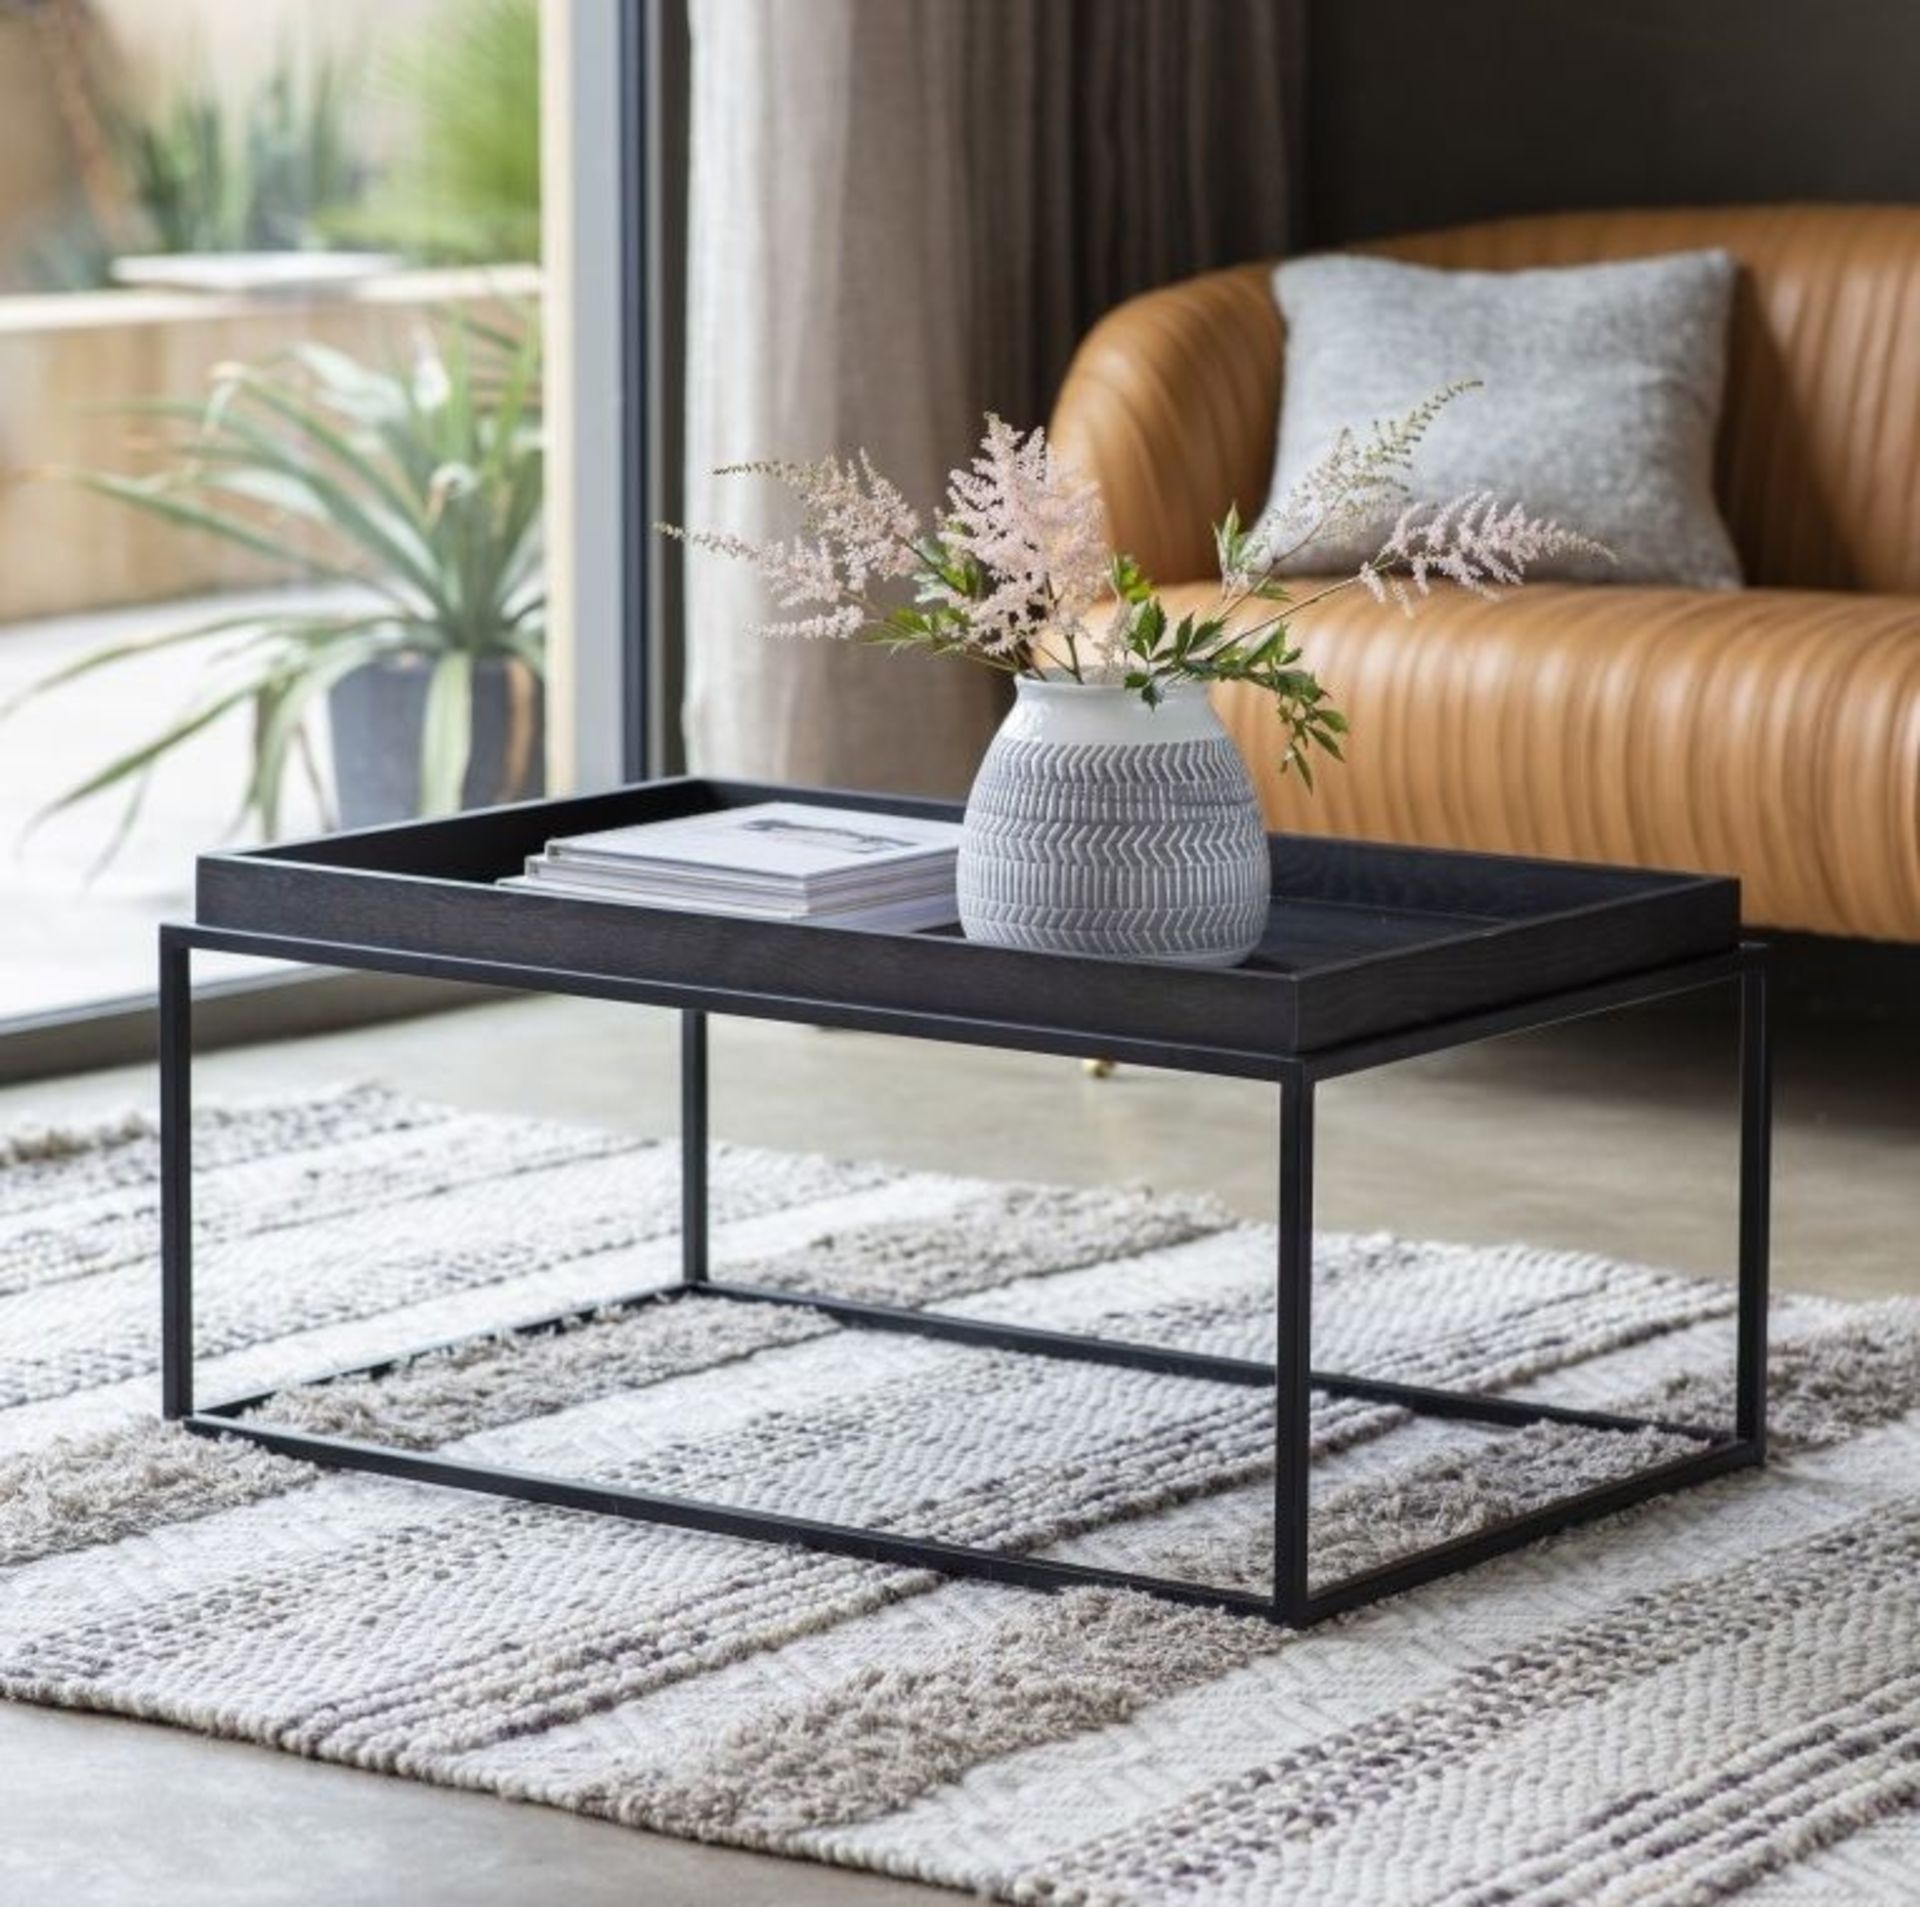 Forden Tray Coffee Table Black The Forden Black Side Table Completed With A Practical Tray Top Table